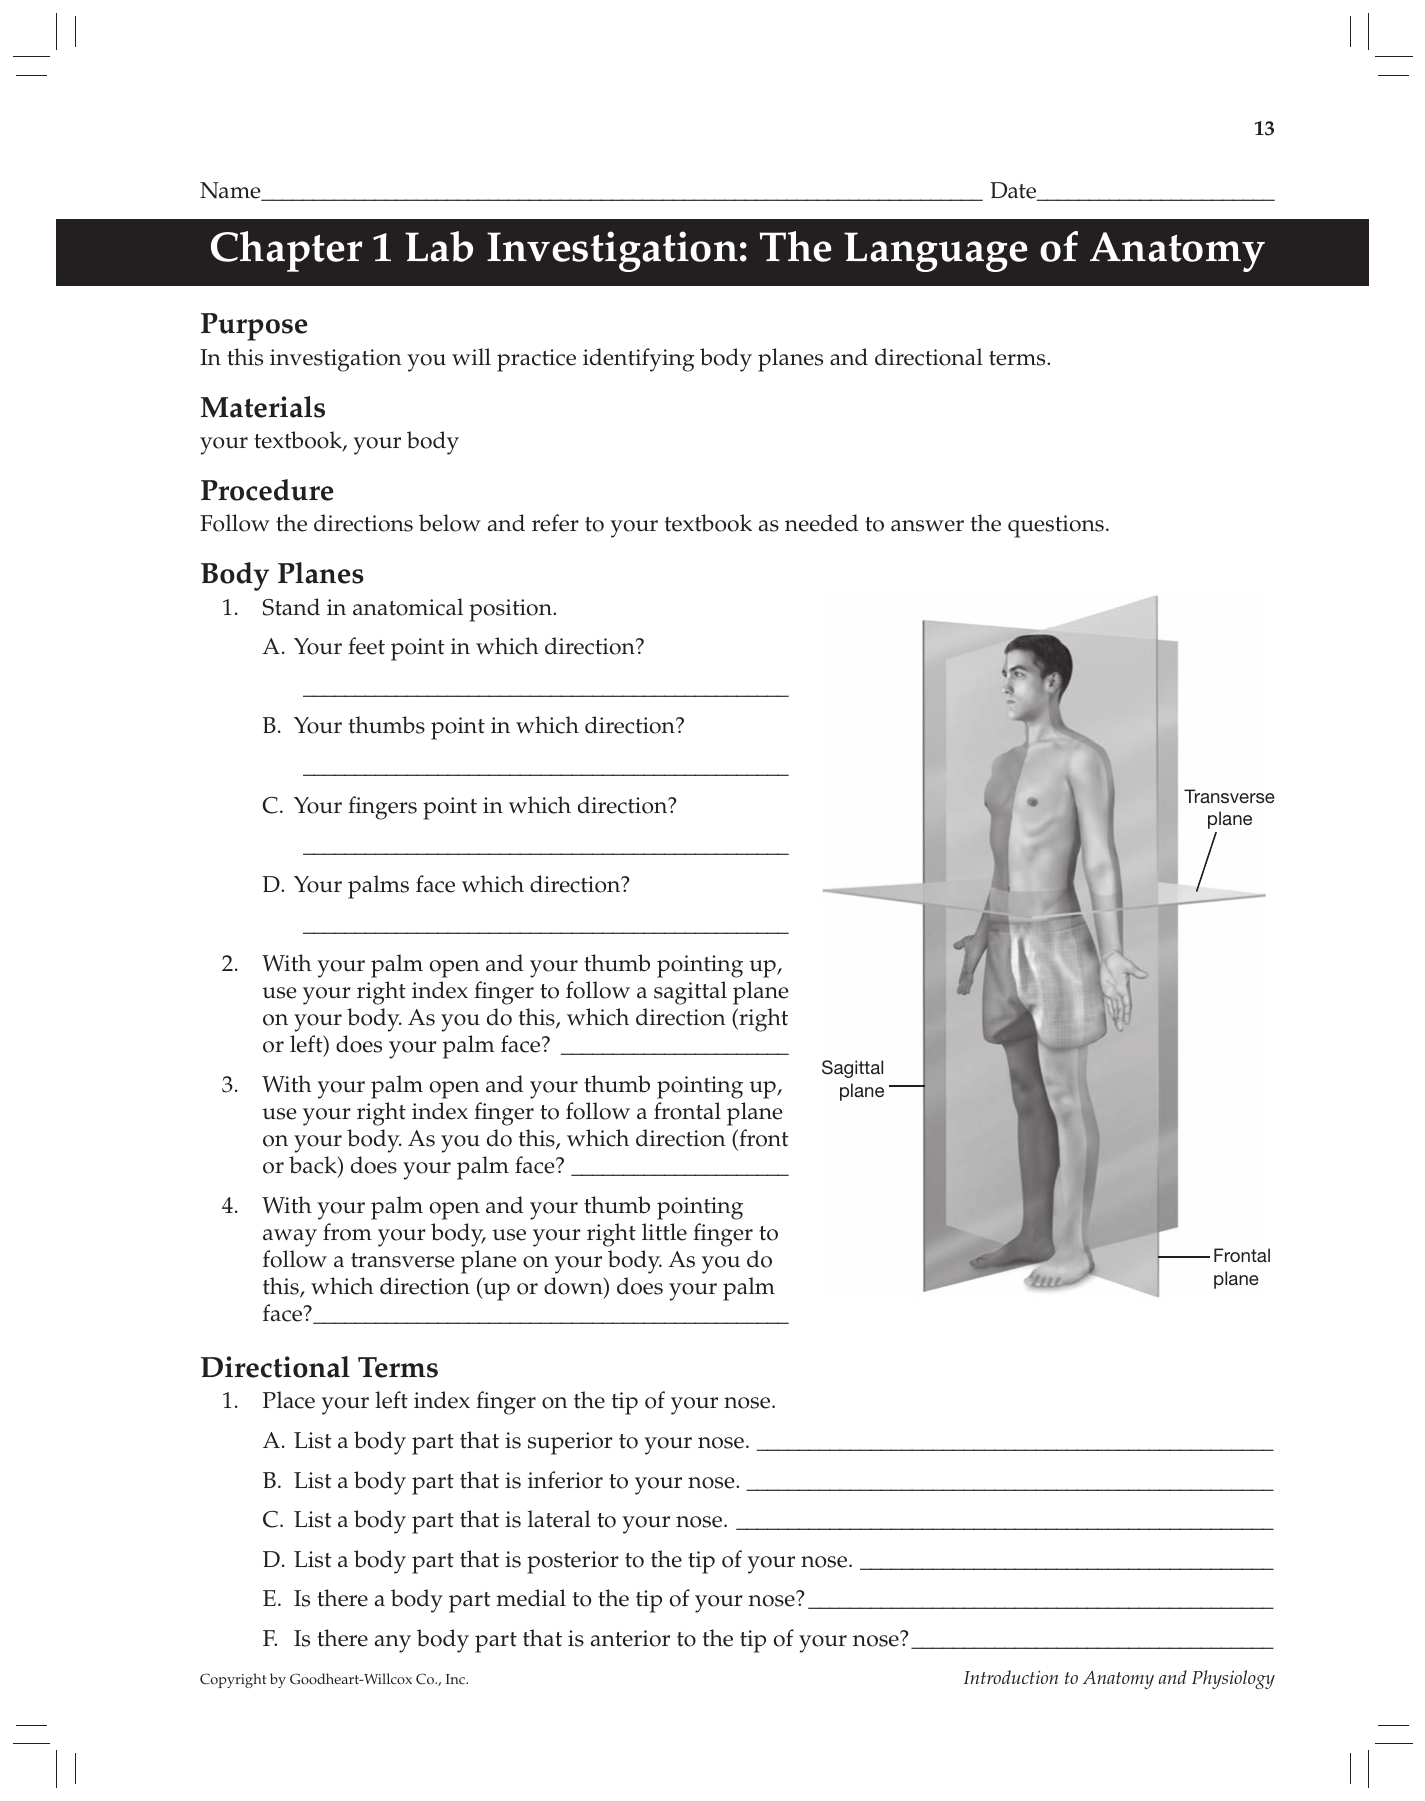 anatomy-and-physiology-coloring-workbook-answer-key-chapter-1-2-interactive-anatomy-and